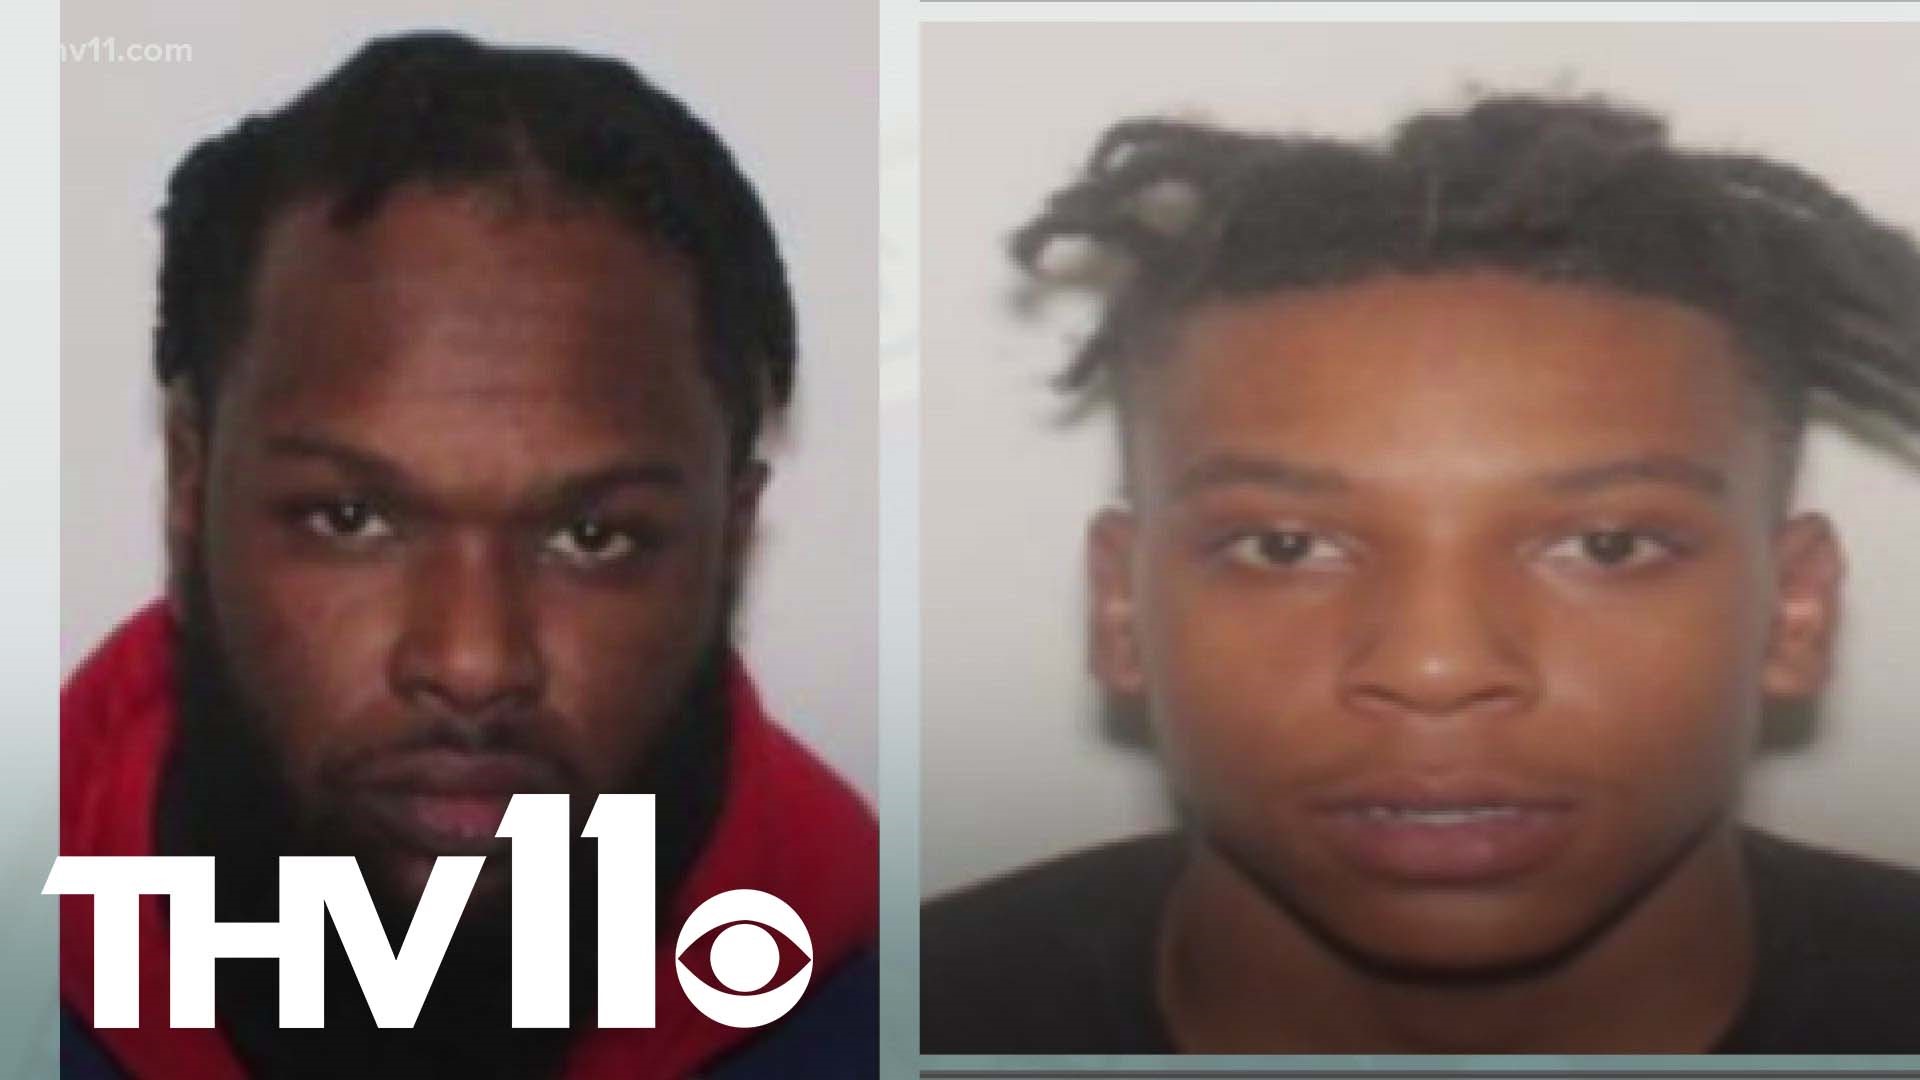 This weekend, the U.S. Marshals office will continue looking for not one, but two dangerous criminals here in Arkansas.